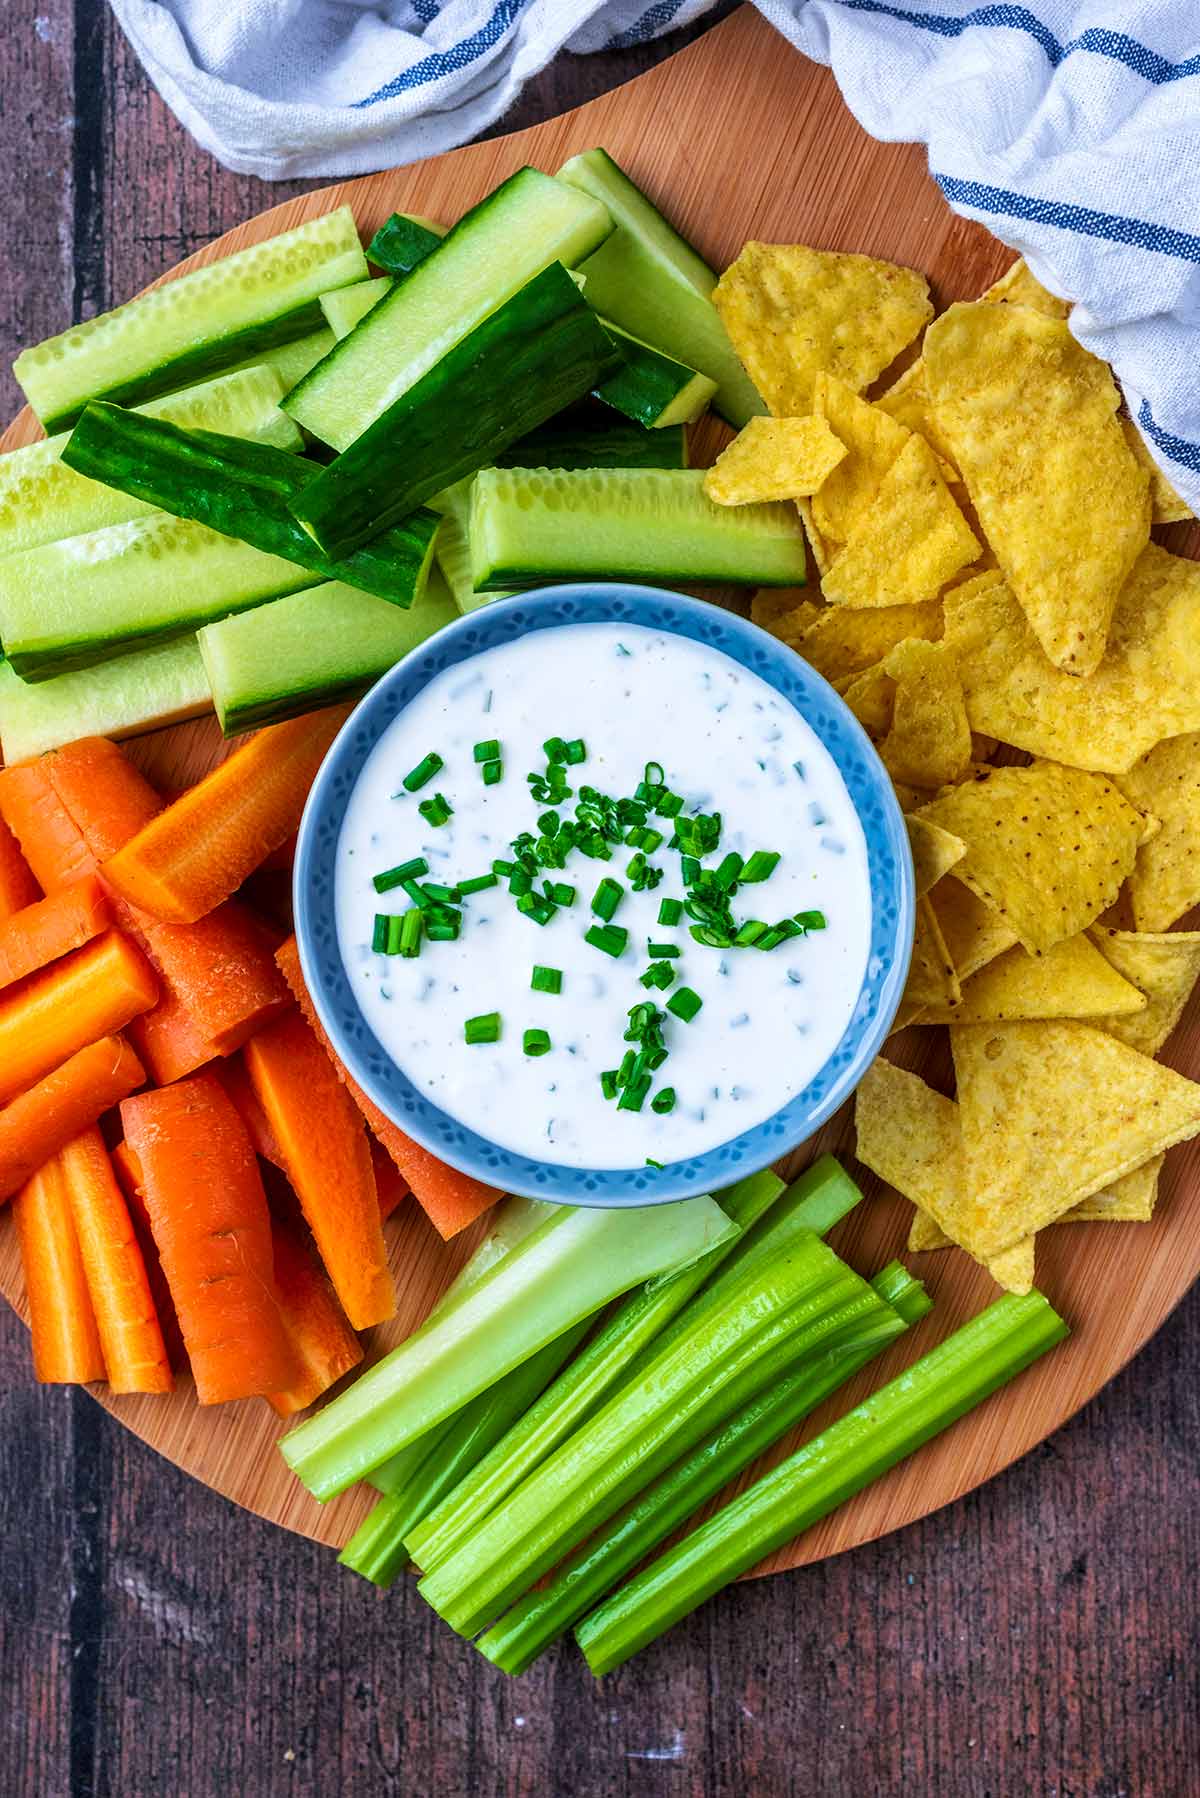 A bowl of creamy dip surrounded by crudités.